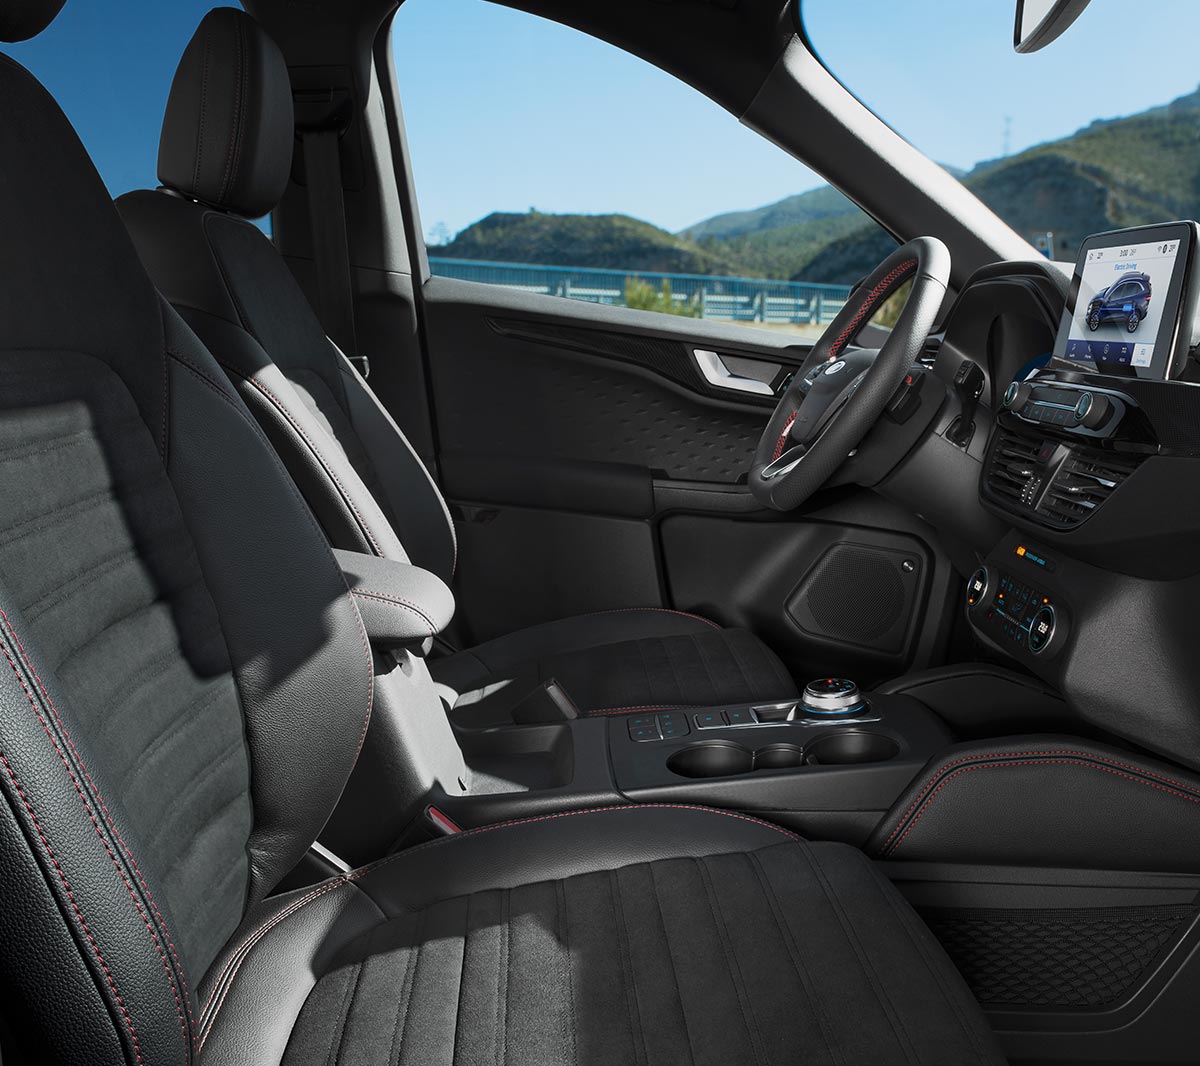 All New Ford Kuga interior showing steering wheel, SYNC3 and leather seats